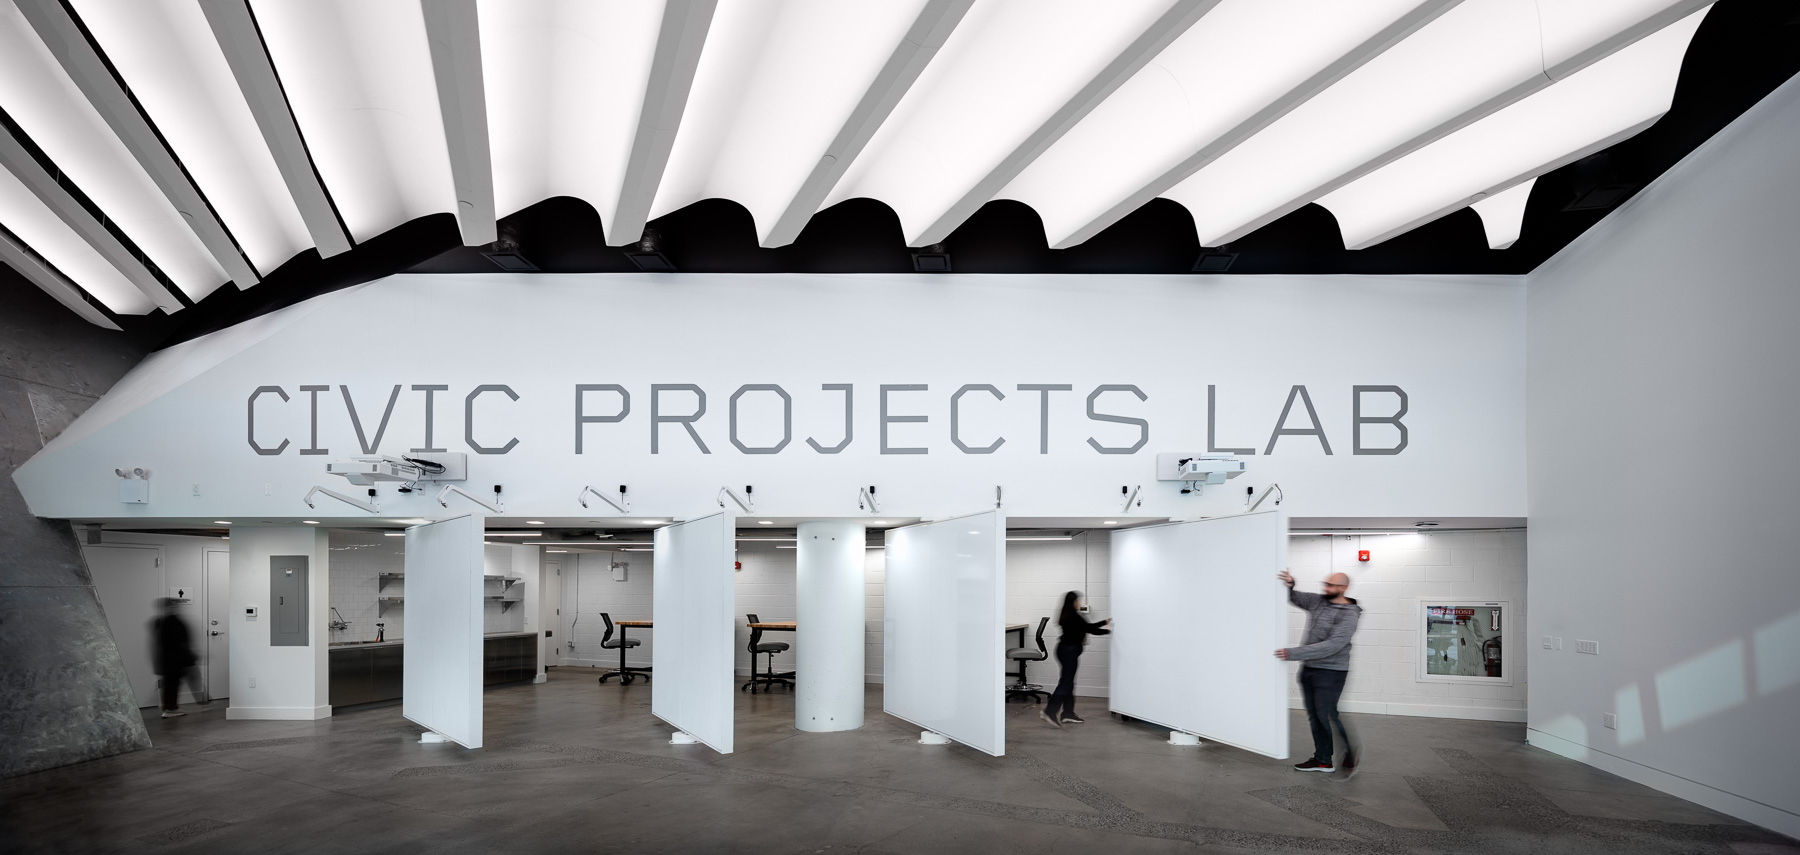 Civic Projects Lab